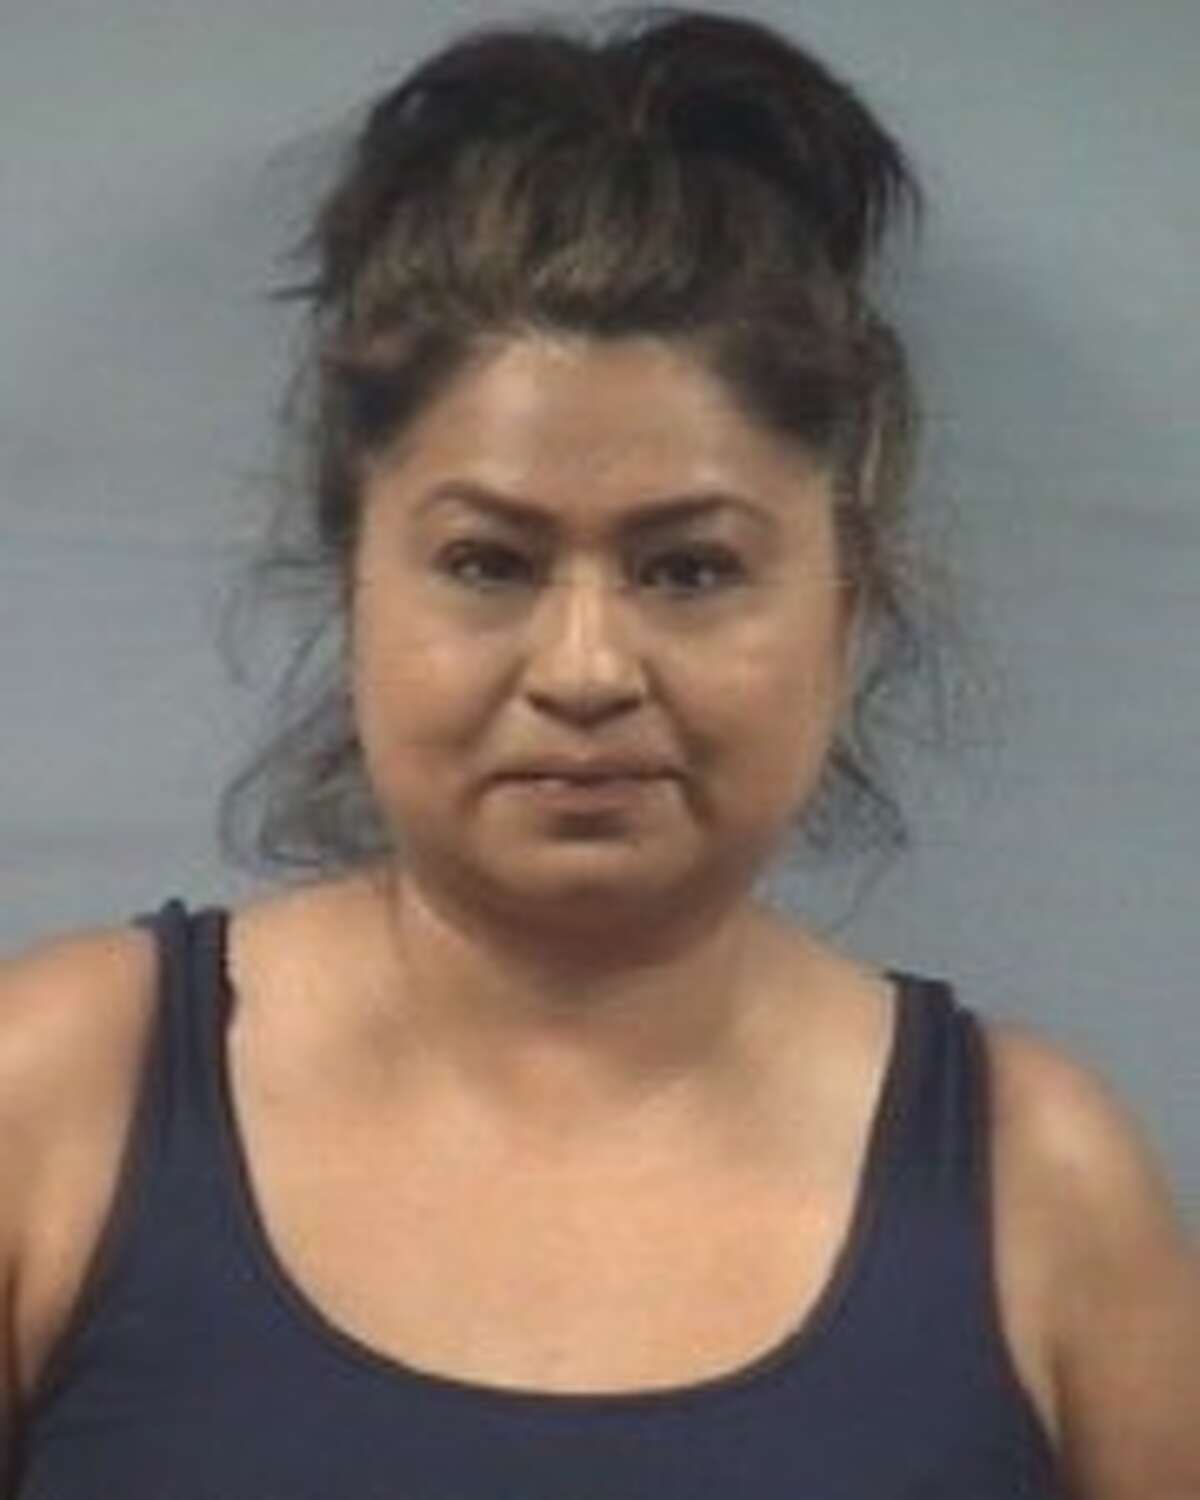 Priscilla Ann Vasquez, 44, was arrested and charged with assault by contact and criminal mischief.